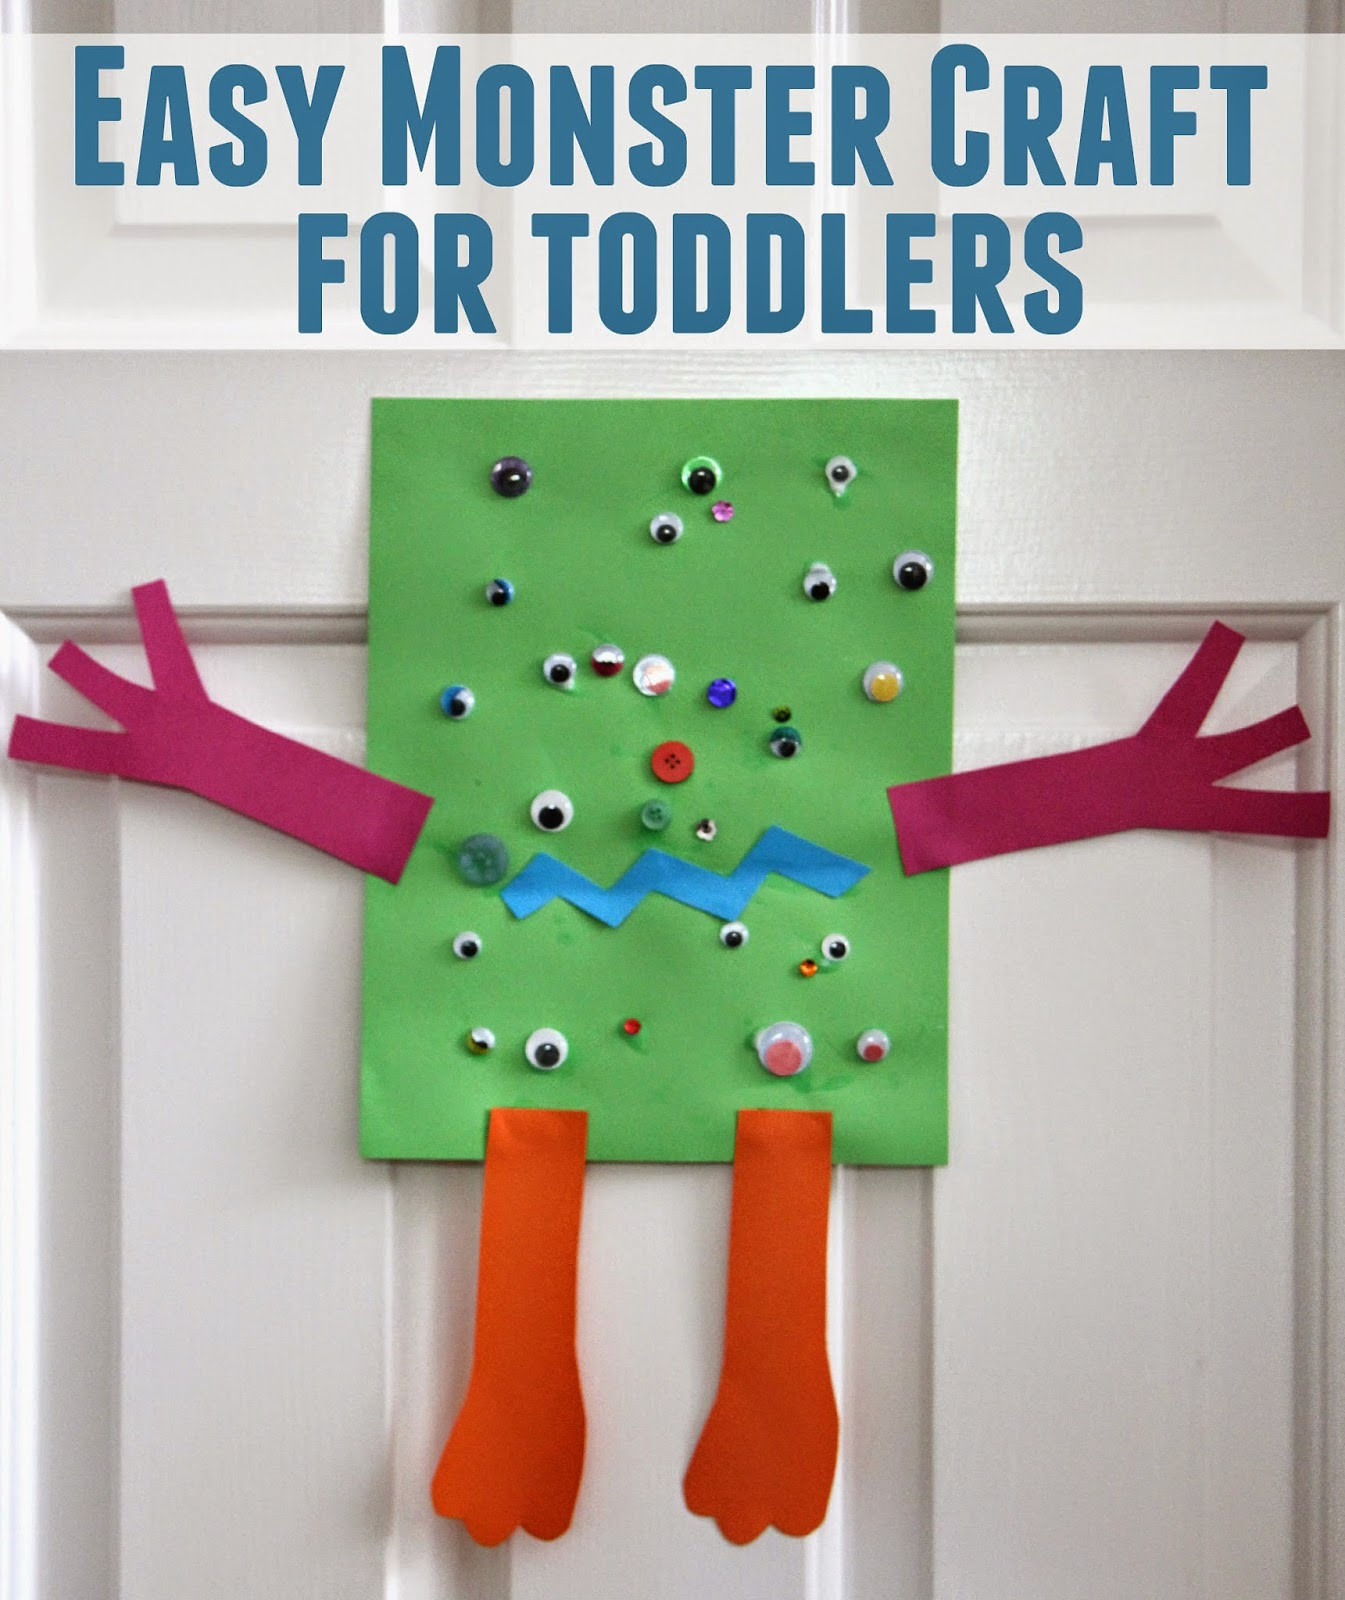 Simple Crafts For Toddlers
 Toddler Approved Easy Monster Craft for Toddlers